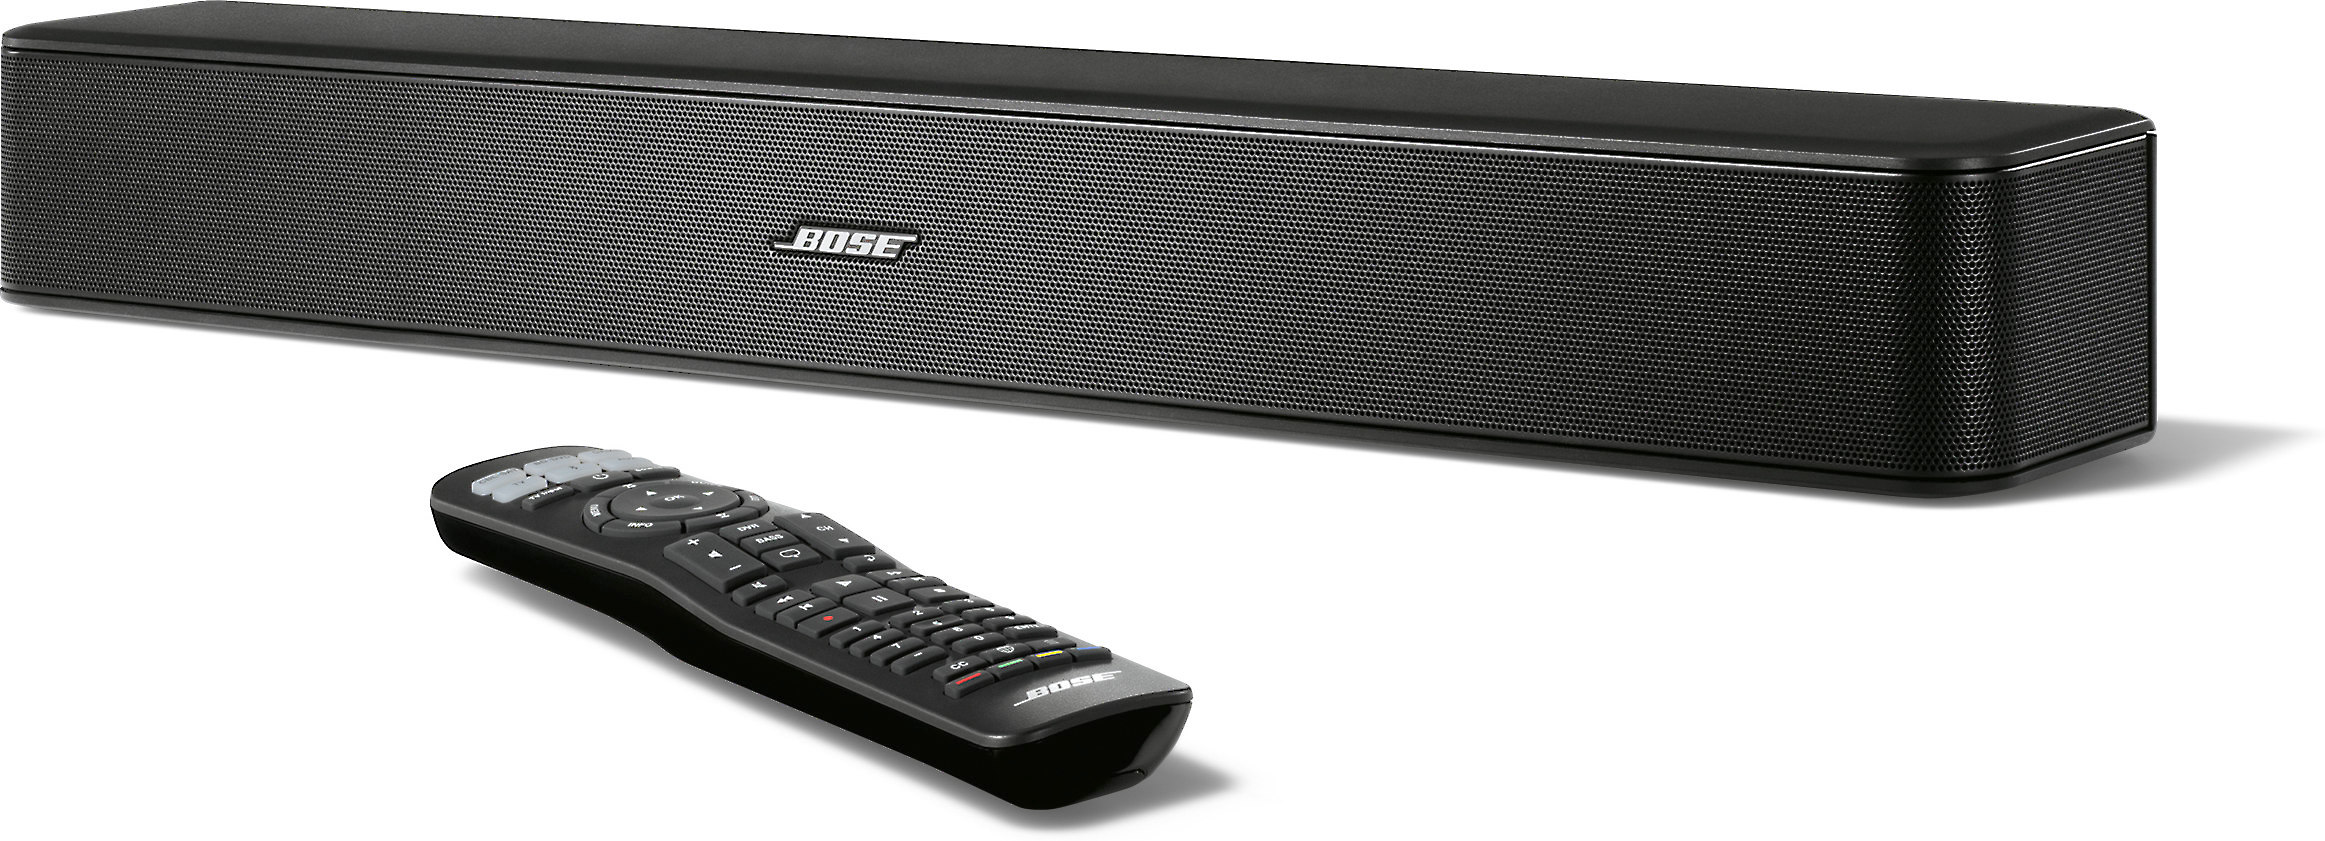 Can you turn on Bose soundbar without remote?